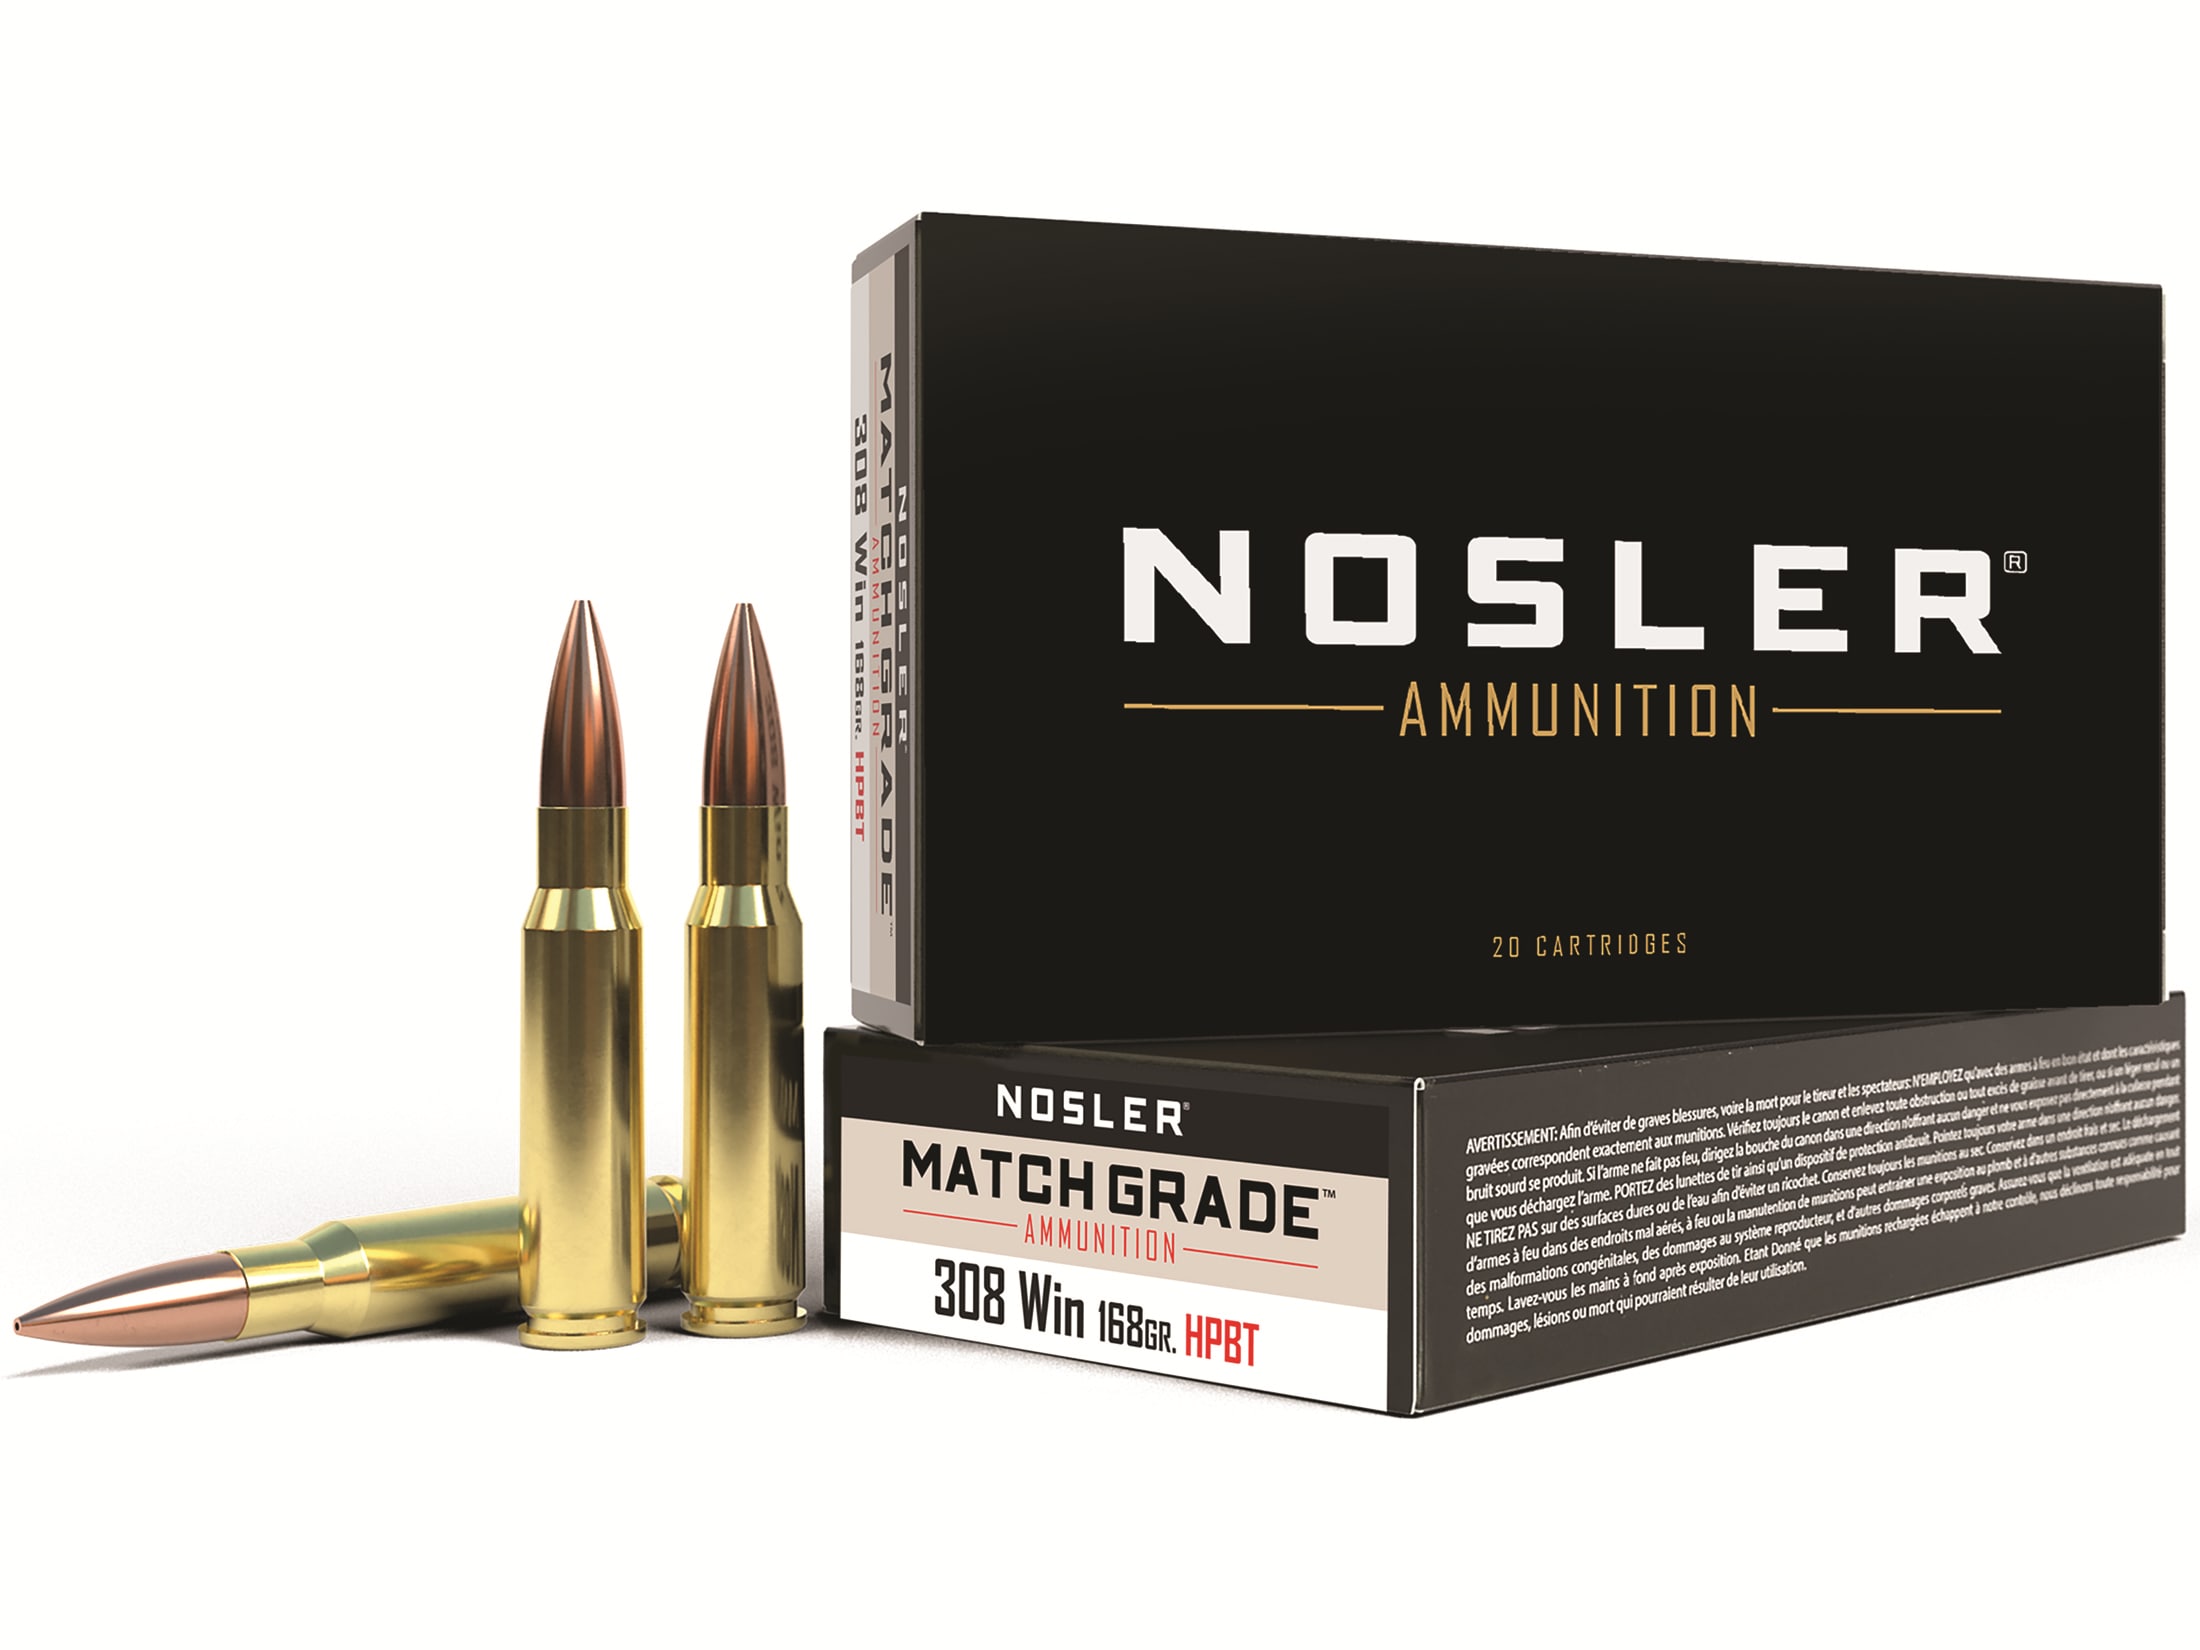 Nosler Match Grade Ammunition 308 Winchester 168 Grain Custom Competition Hollow Point Boat Tail Box of 20